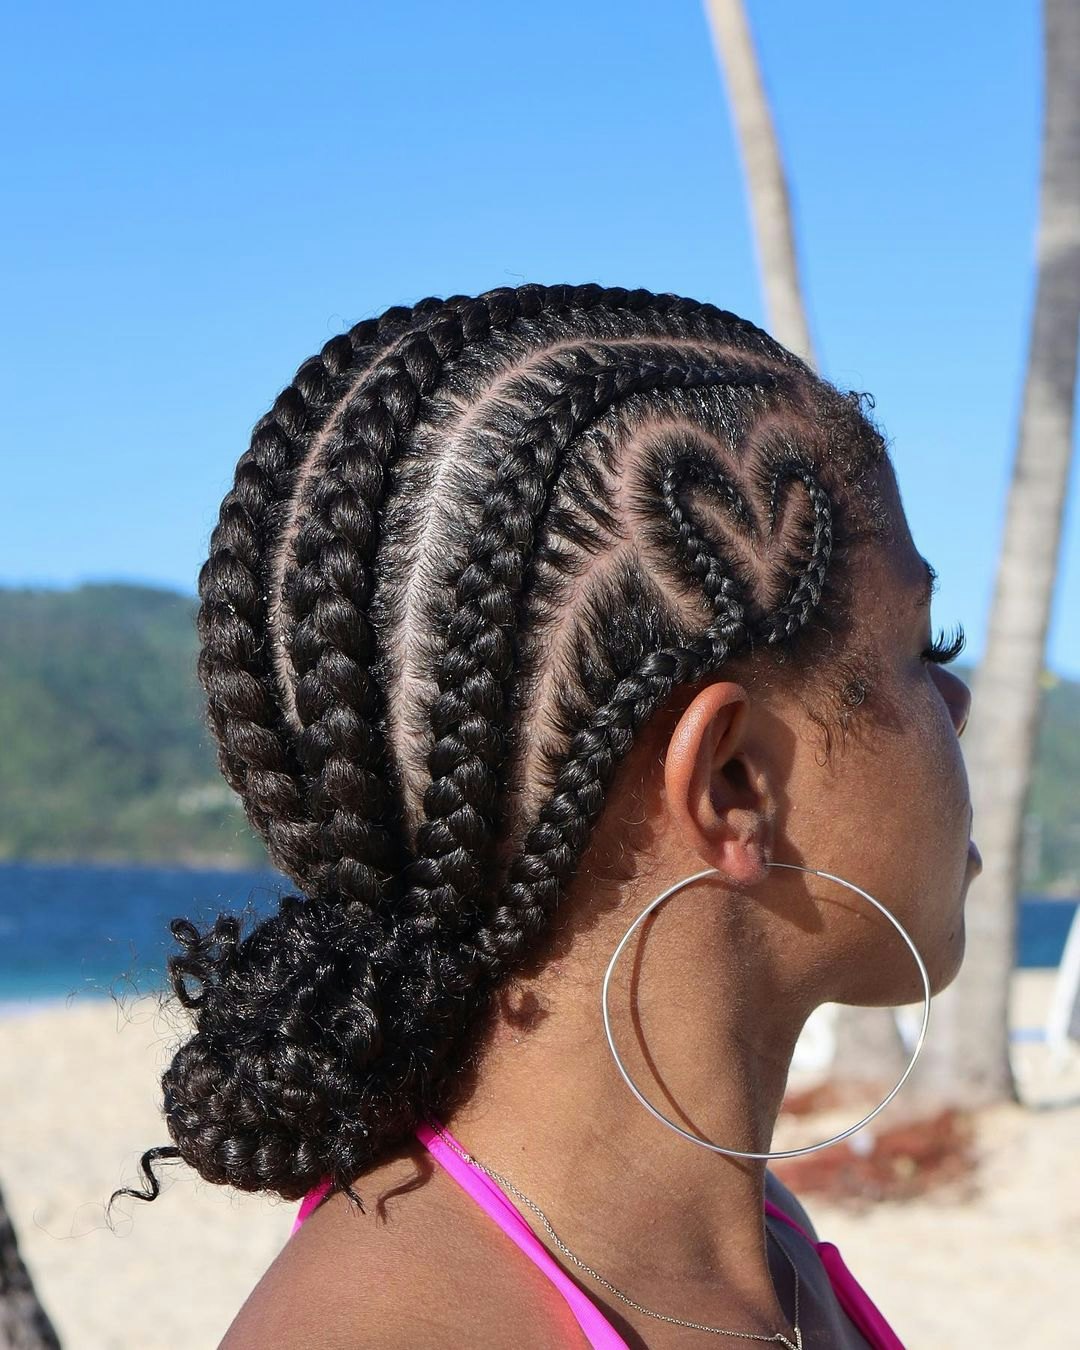 Short Braided Hairstyles Are The Best Way To Keep Cool This Summer